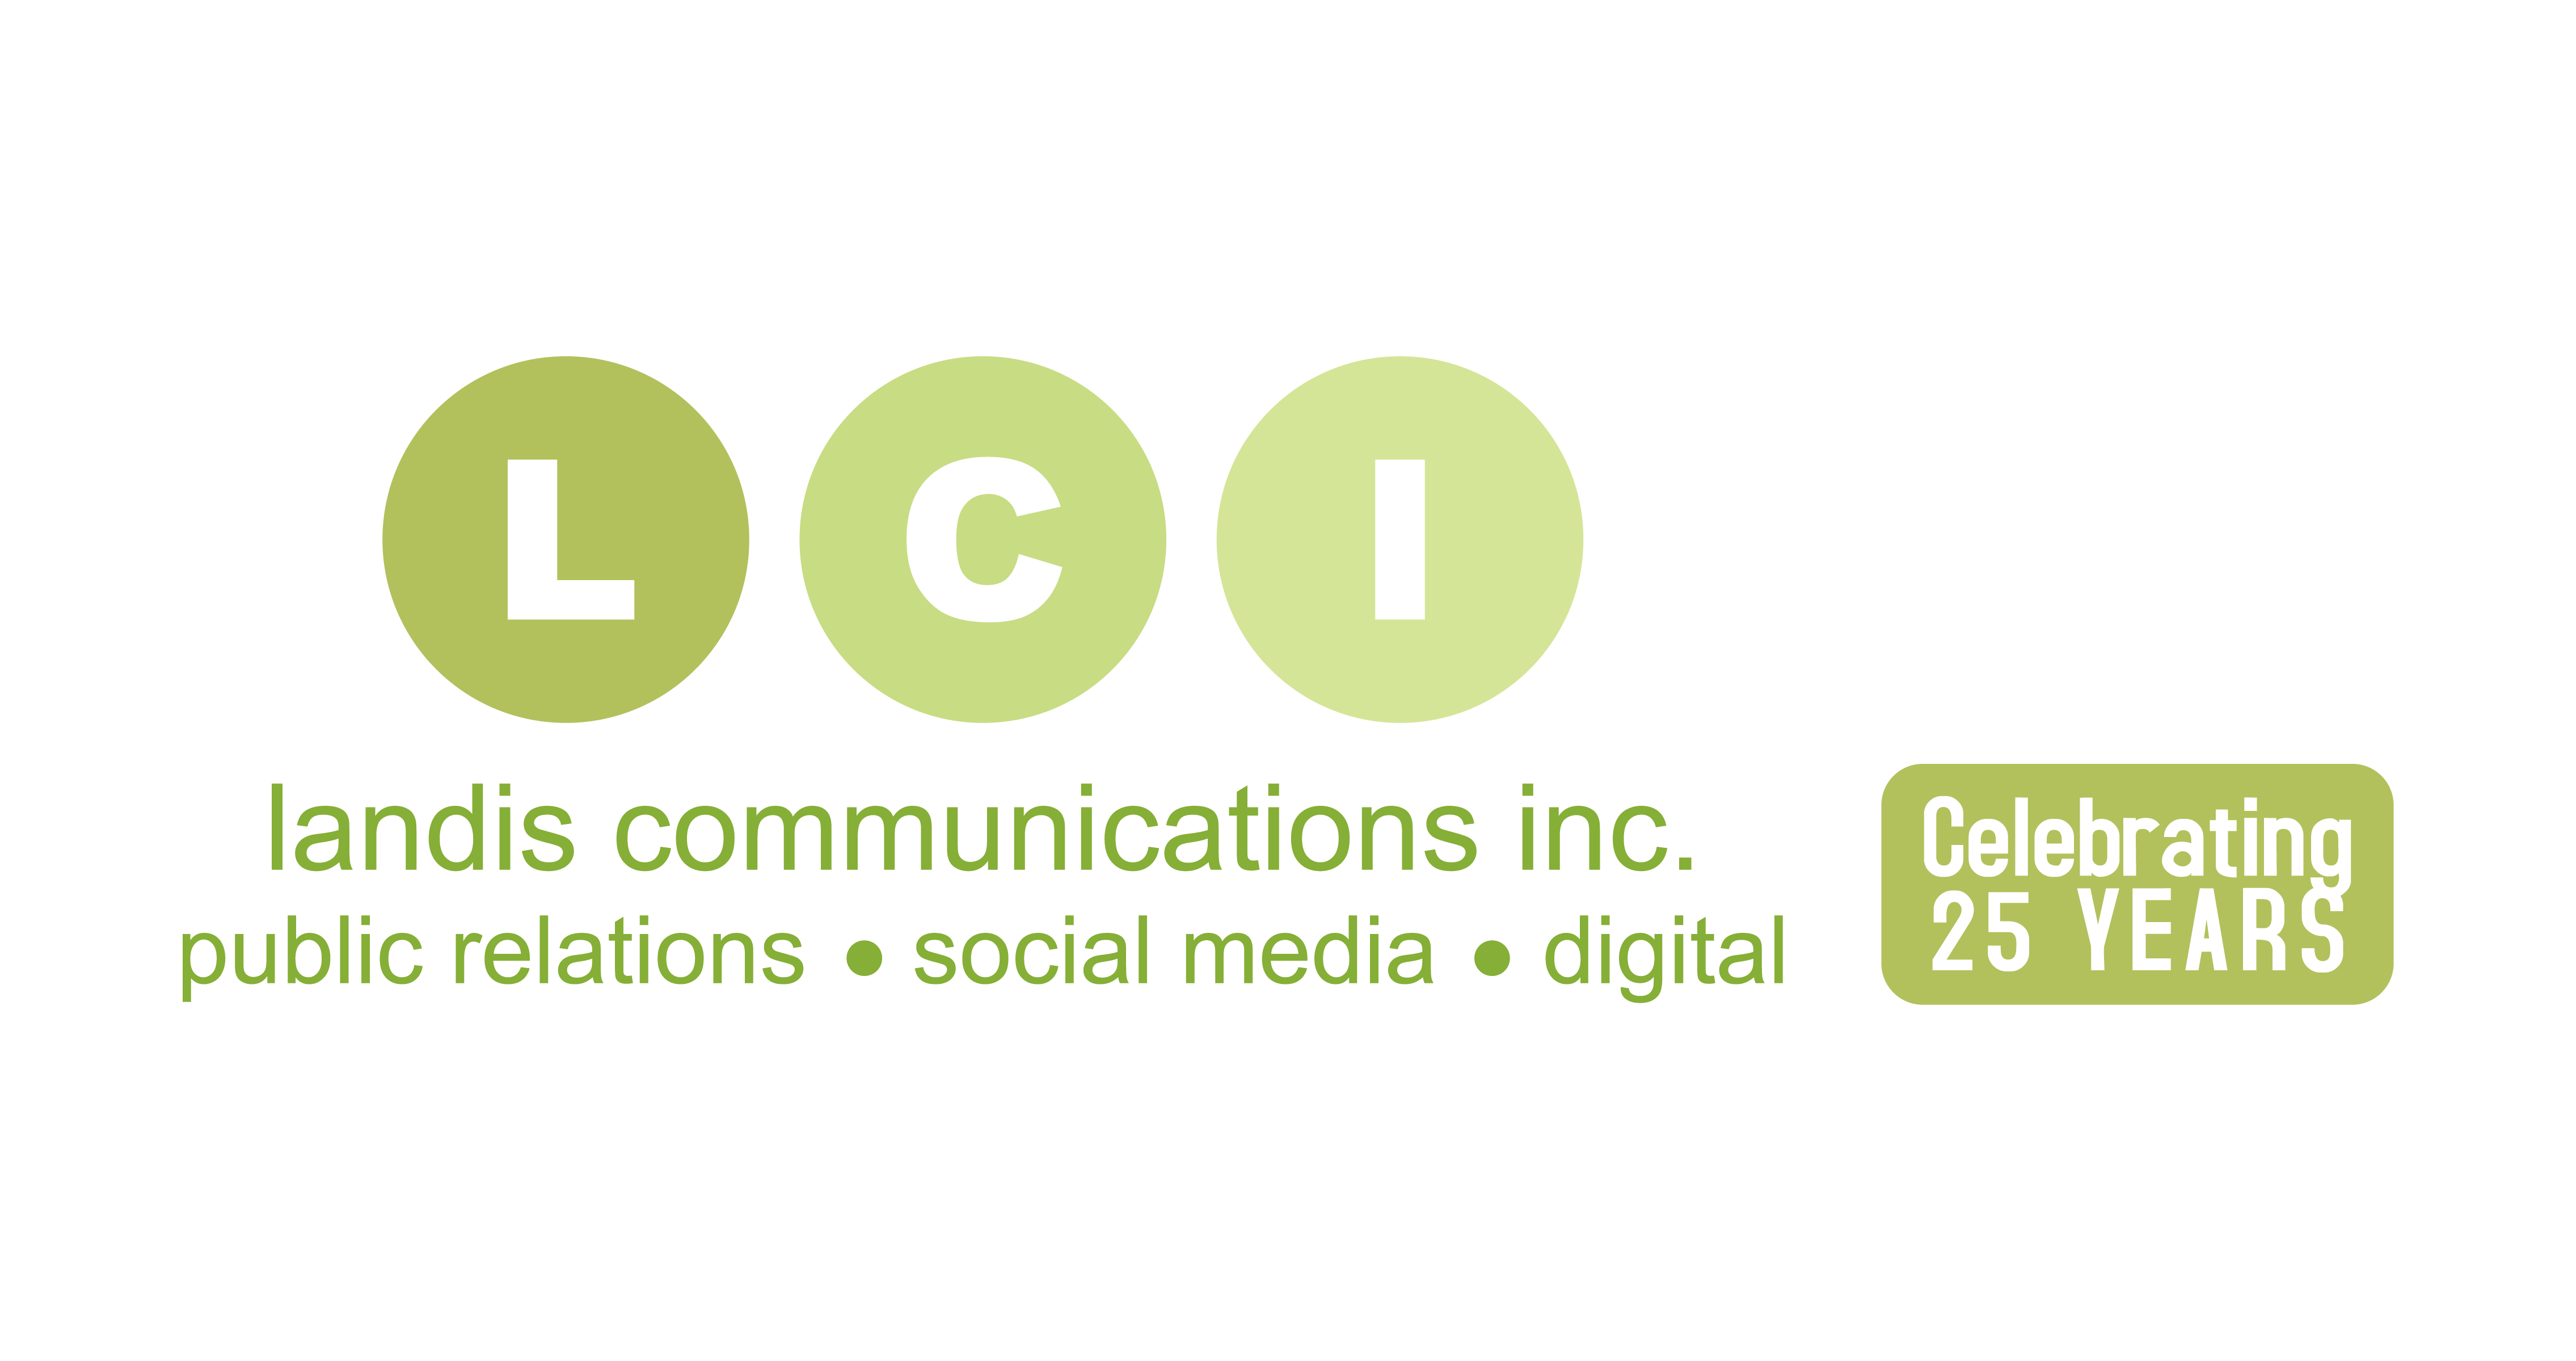 Landis Communications - Logo - https://s39939.pcdn.co/wp-content/uploads/2018/03/Small-Agency-Landis.png